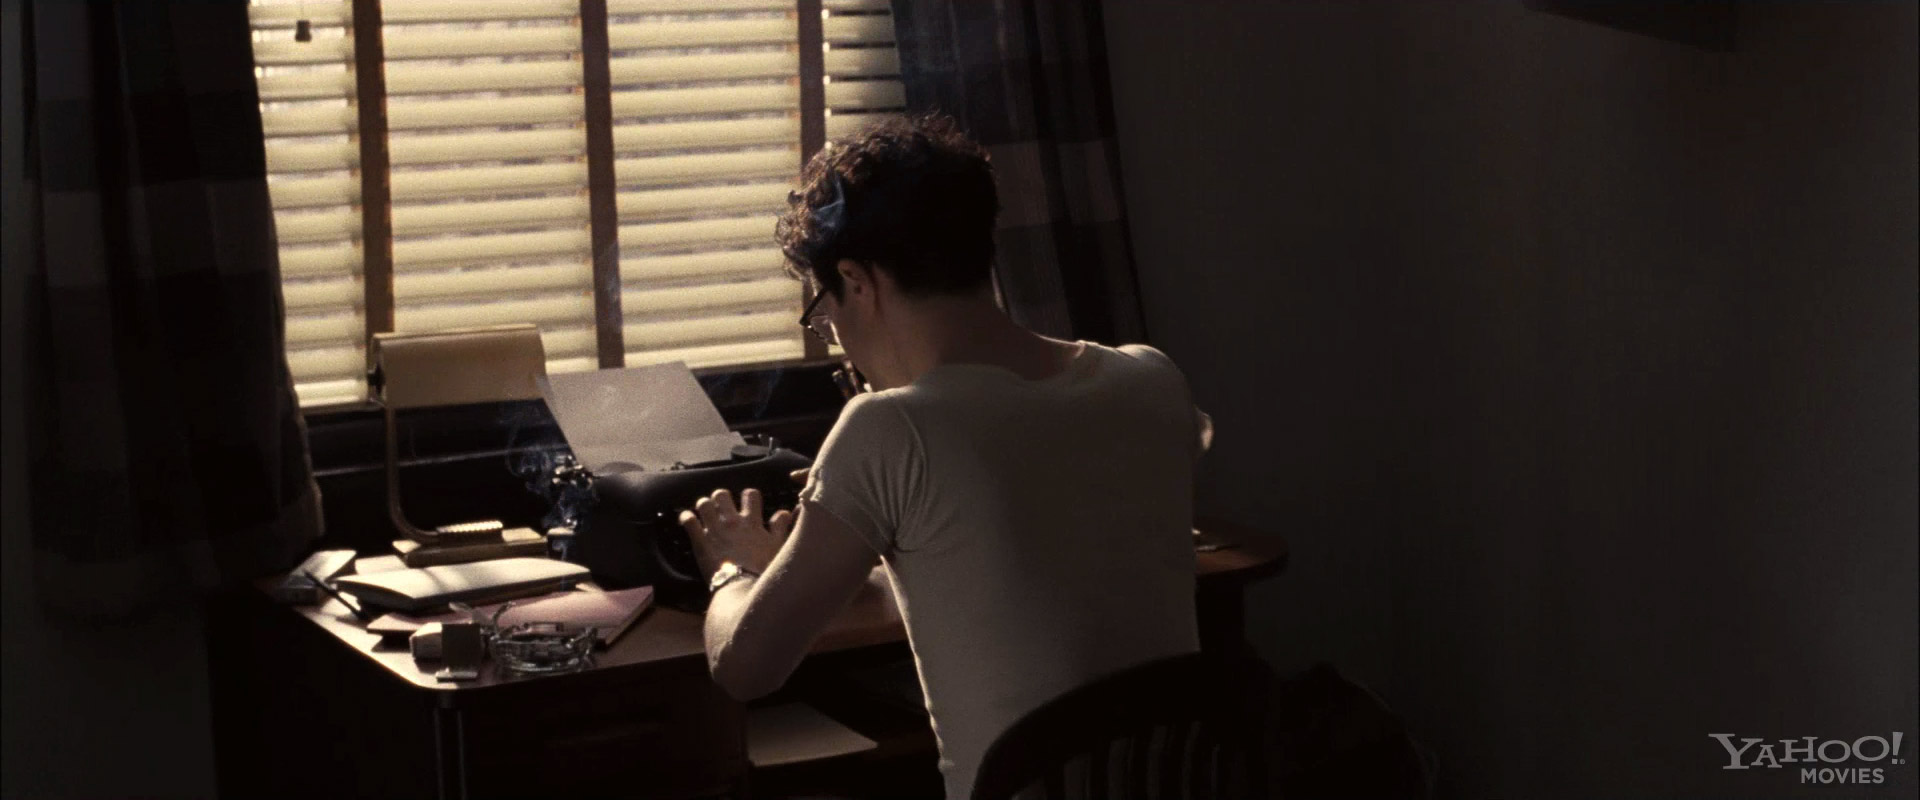 trailer-for-kill-your-darlings-with-daniel-radcliffe-09.jpg